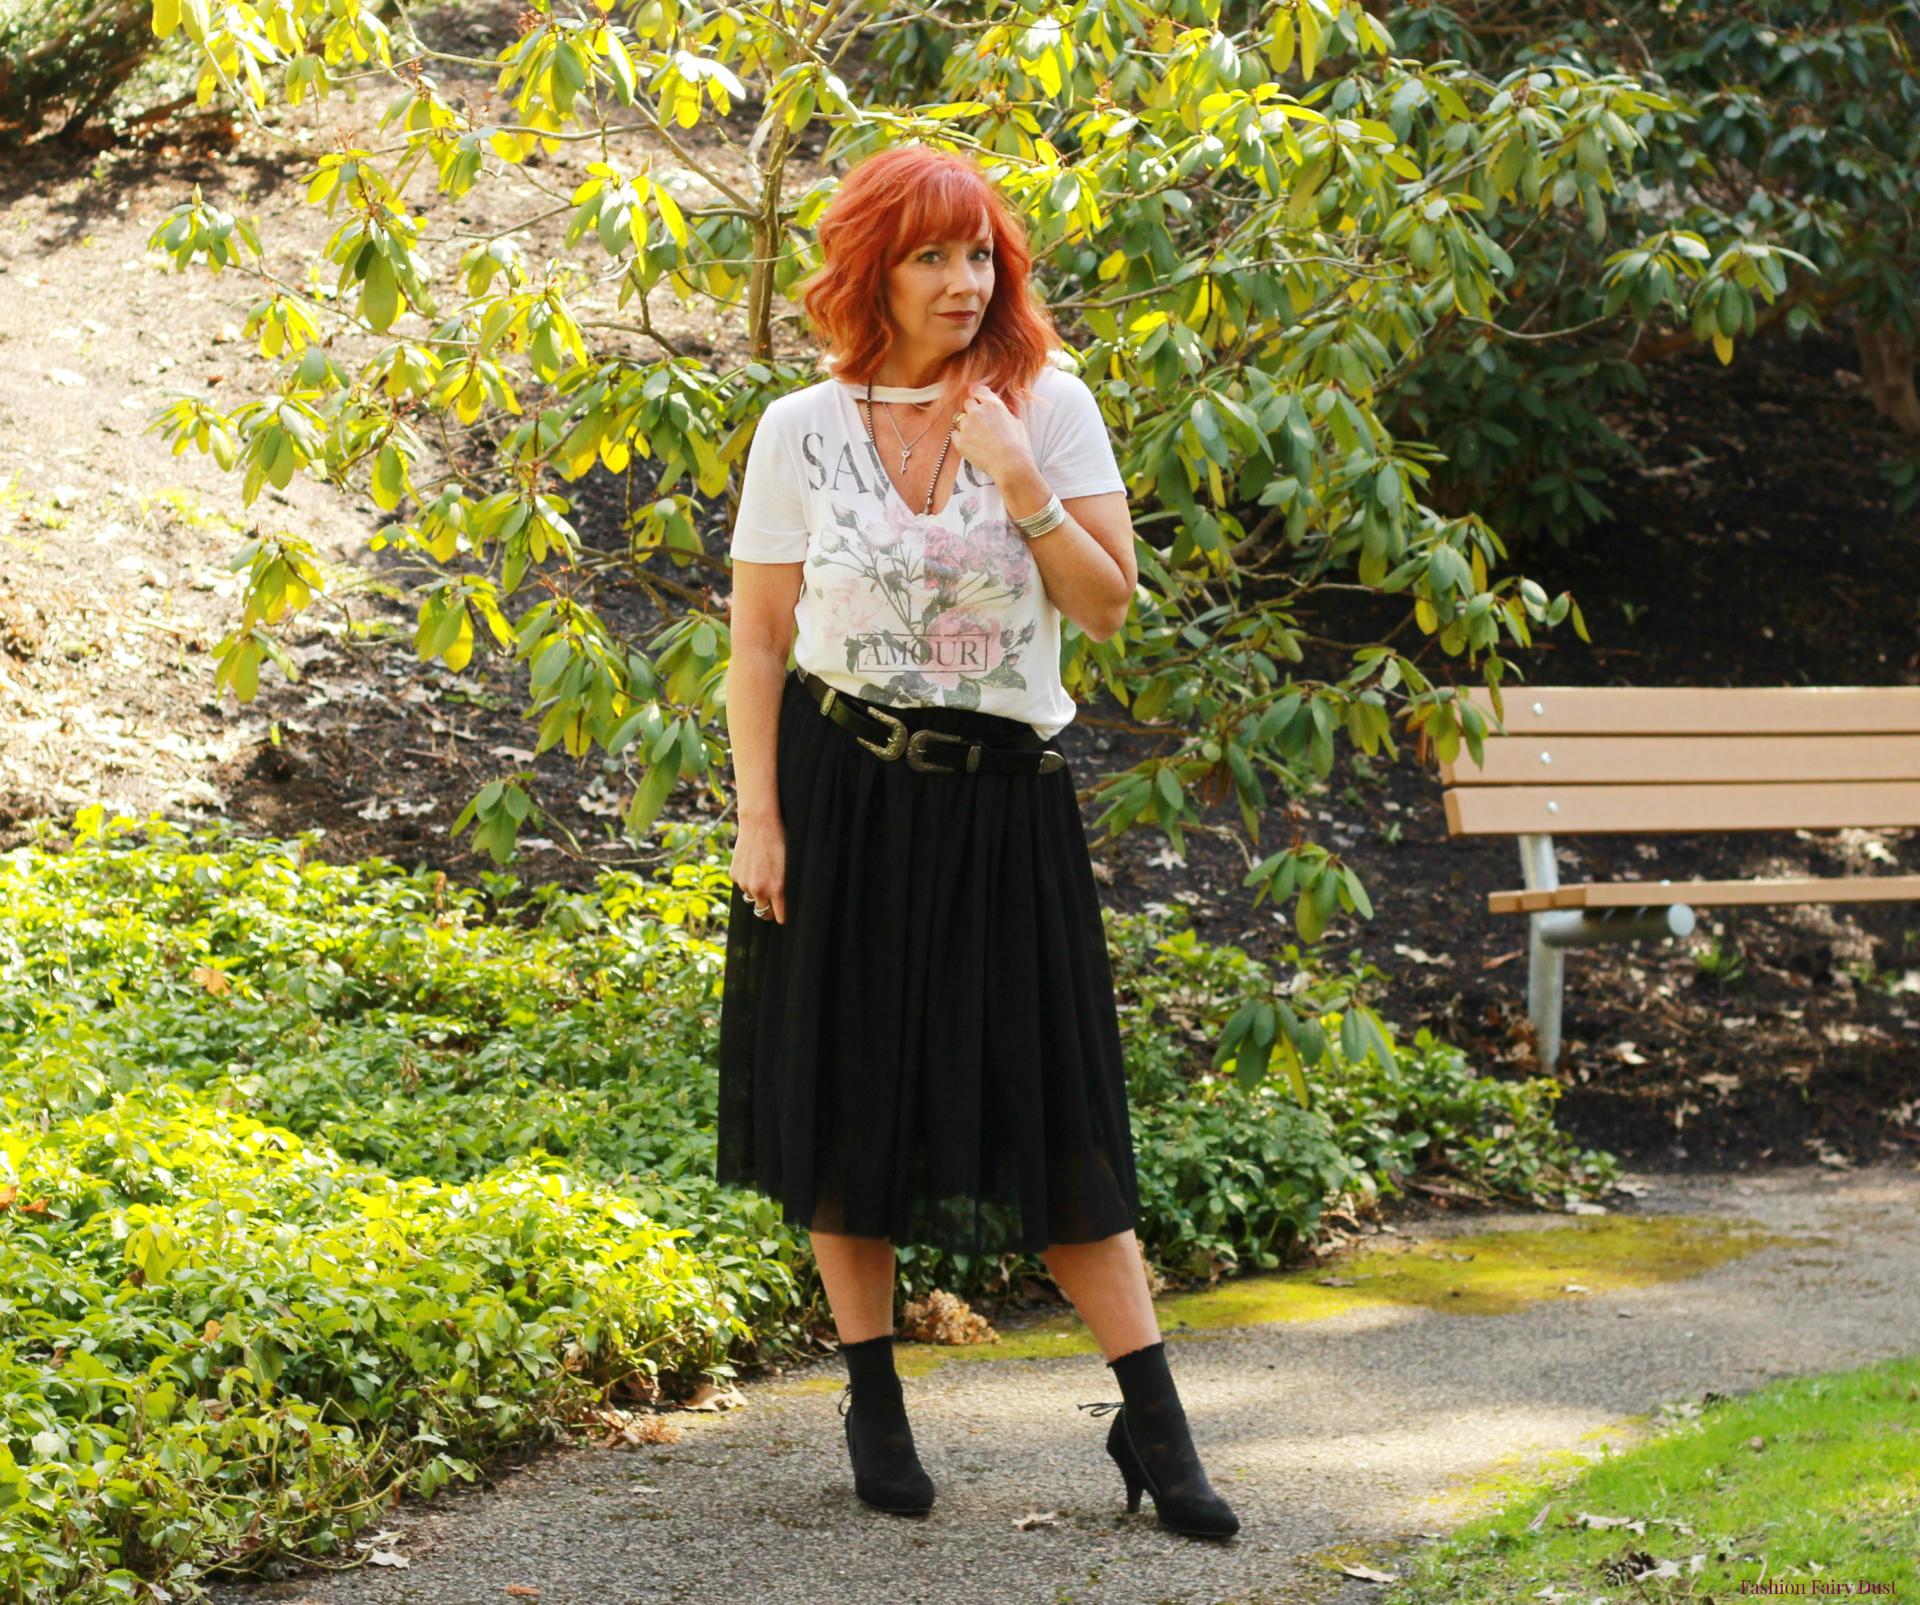 Tulle Skirt & Cowboy Boots: A Reflection Of Who You Are